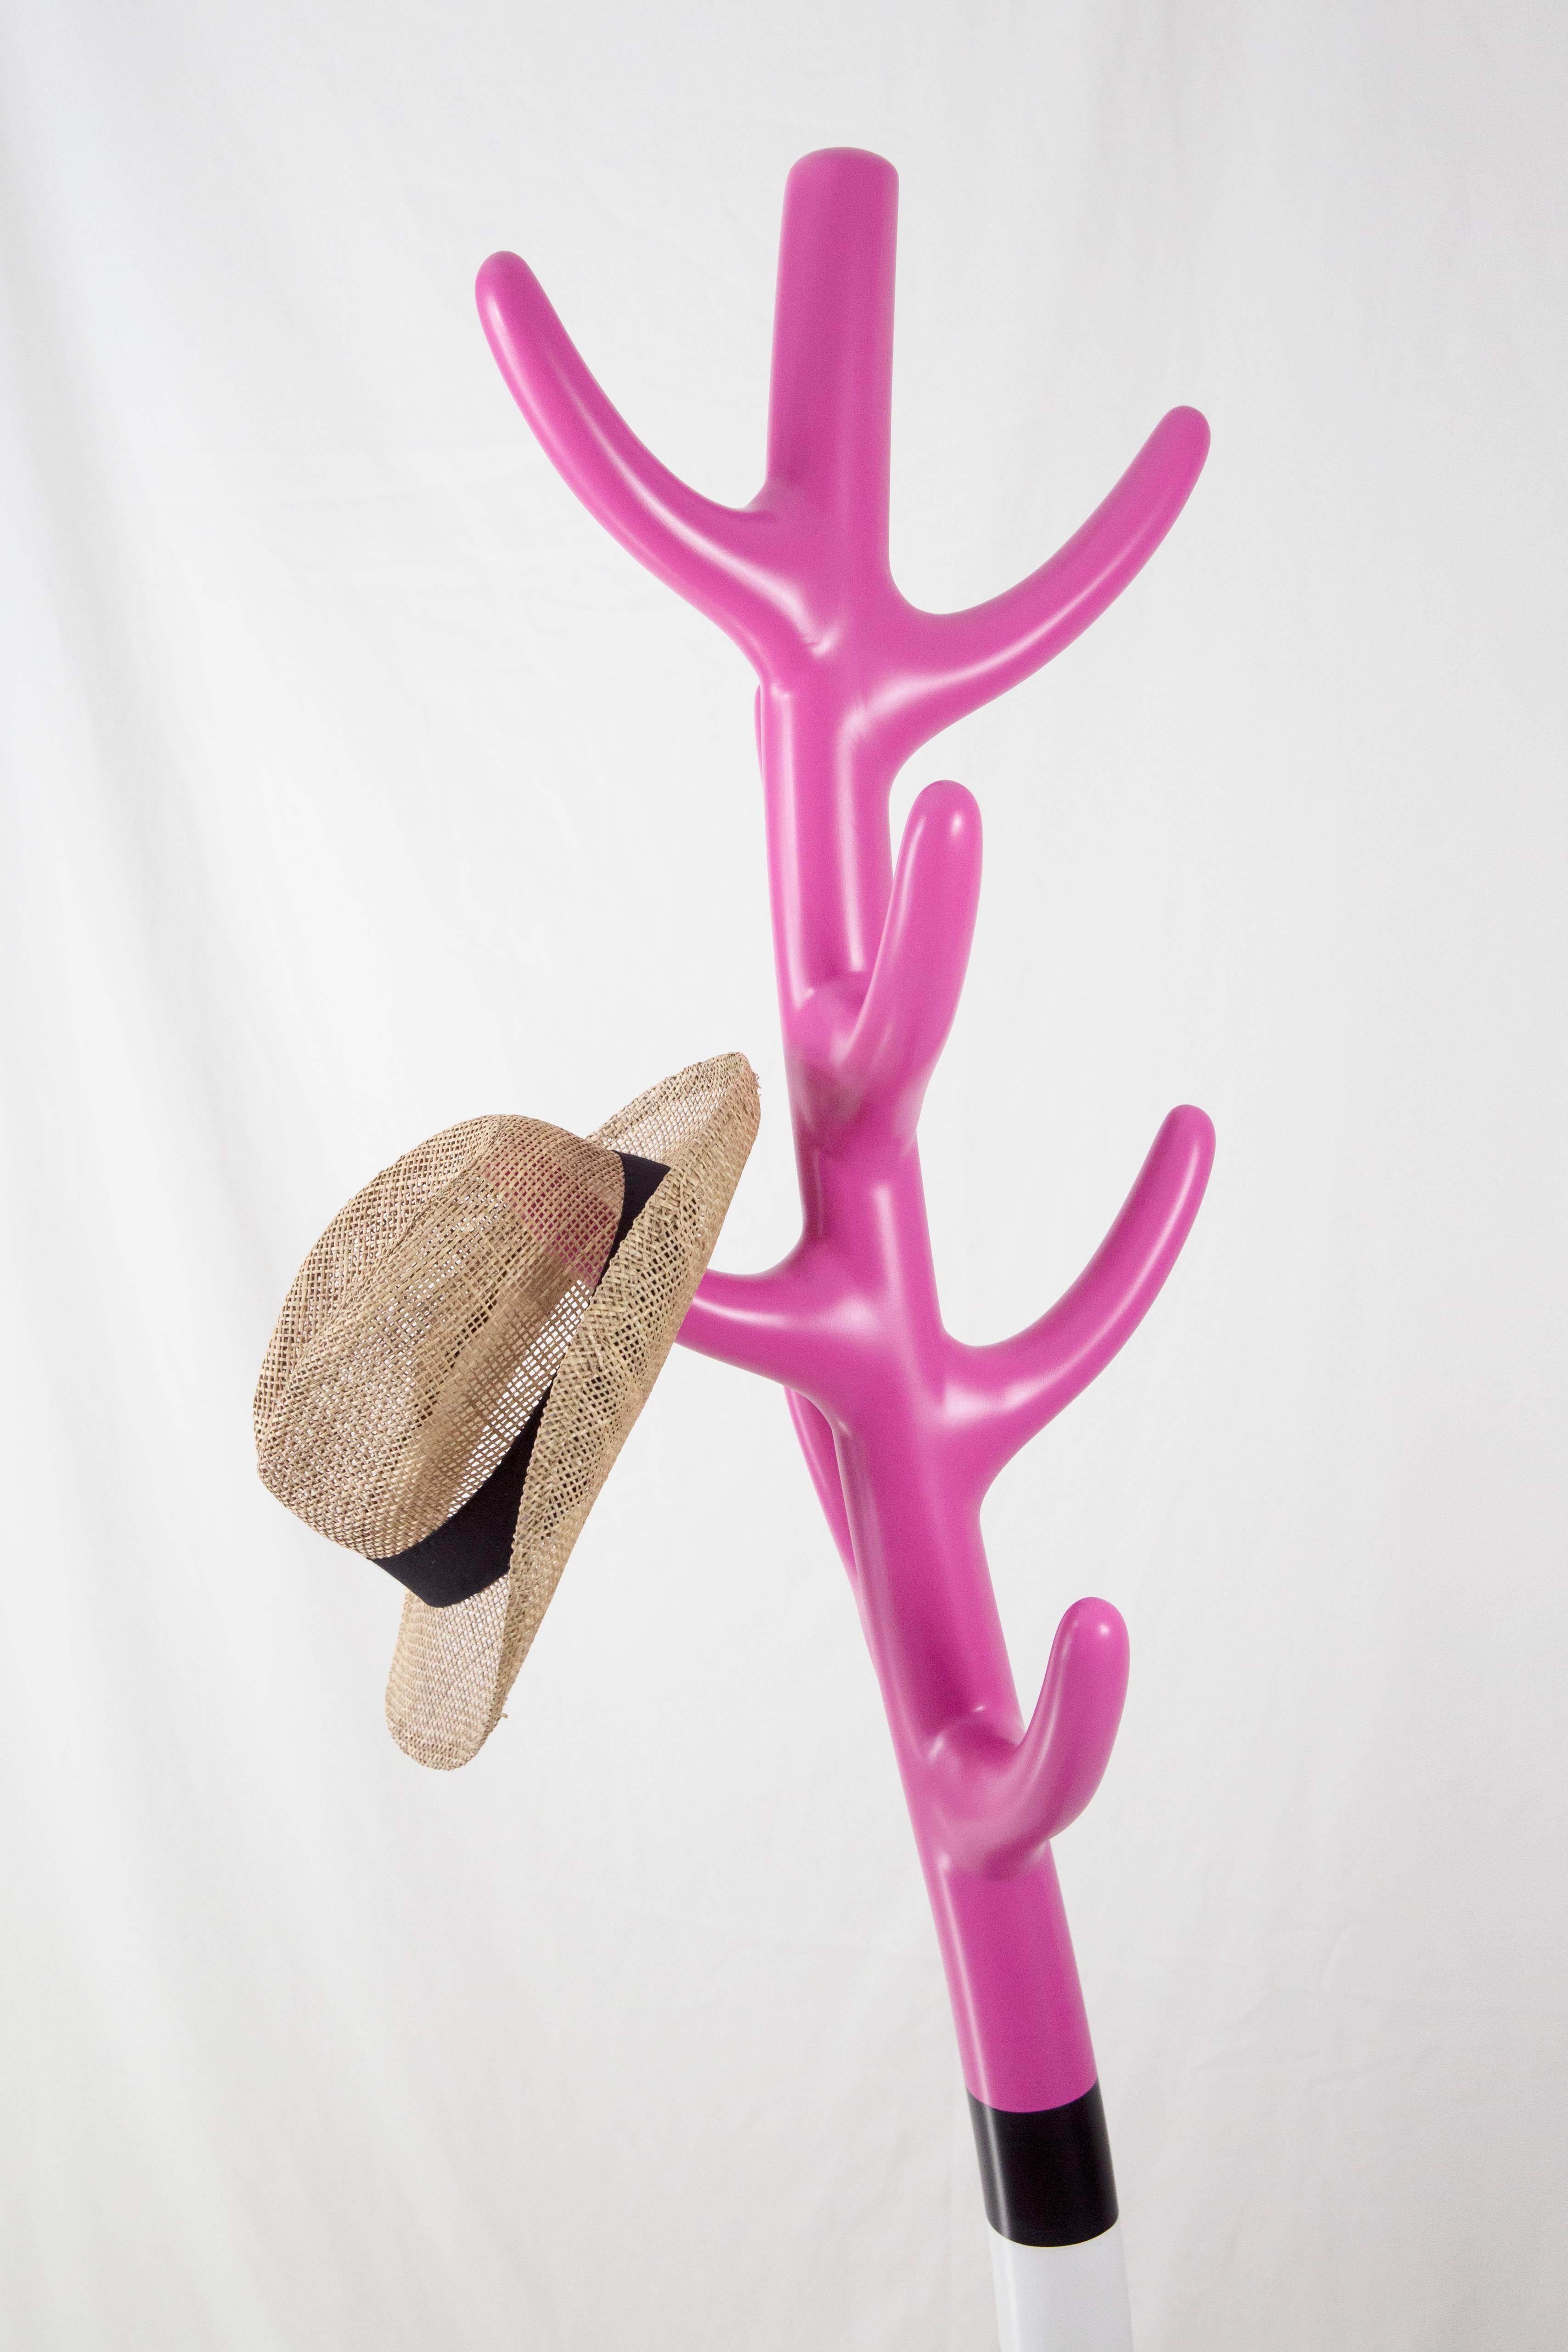 Overview:
Brighten up your space with the Crooked Coat Rack, a blend of functional design and artistic innovation. This striking coat rack, in a vivid pink hue, not only offers practical utility but also serves as an eye-catching art piece, ensuring